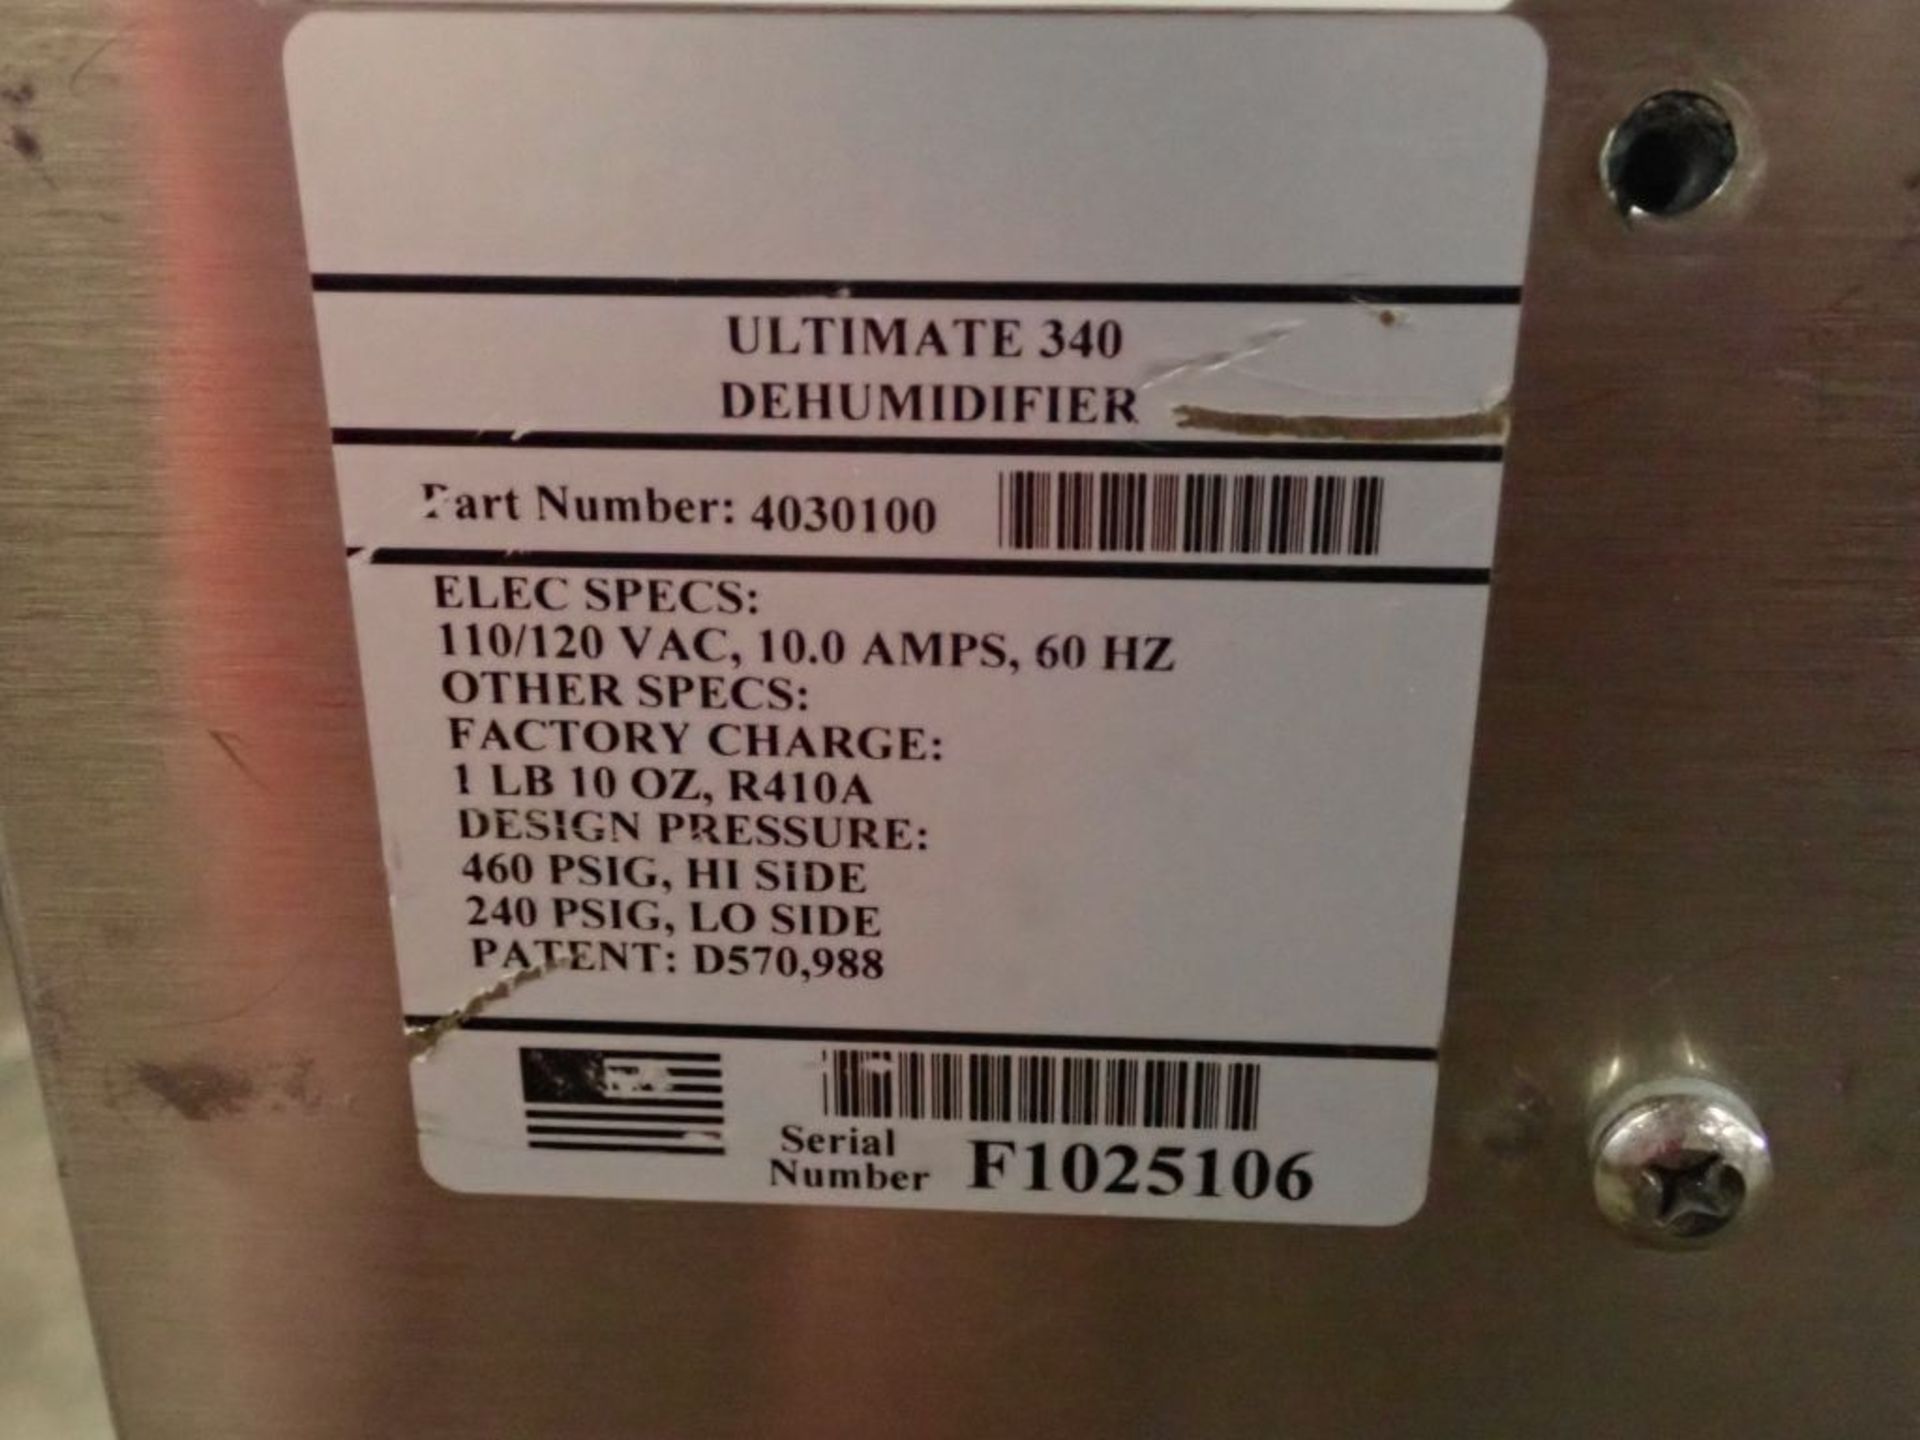 Ultimate 340 High Performance Dehumidifier - Image 7 of 7